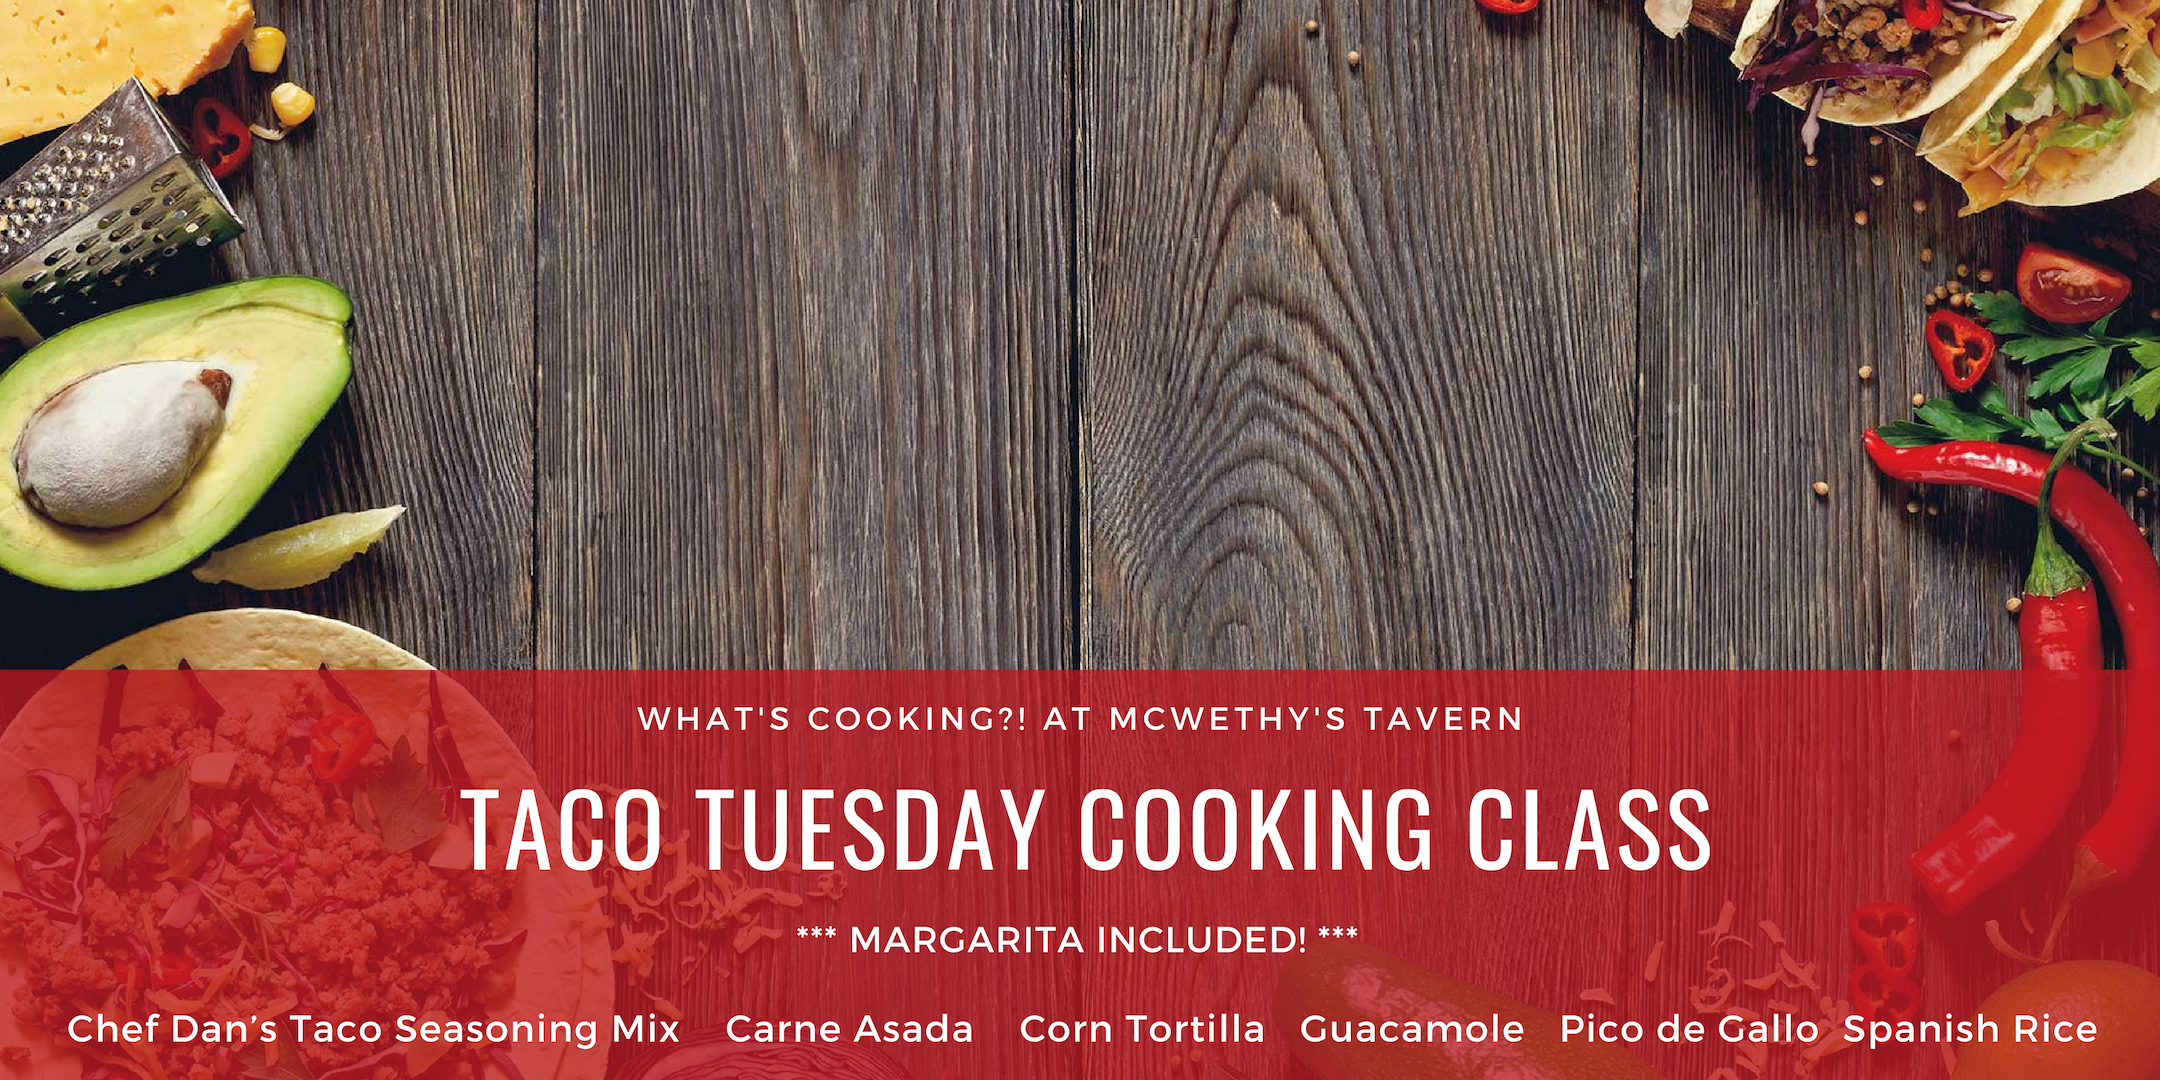 Taco tuesday cooking class